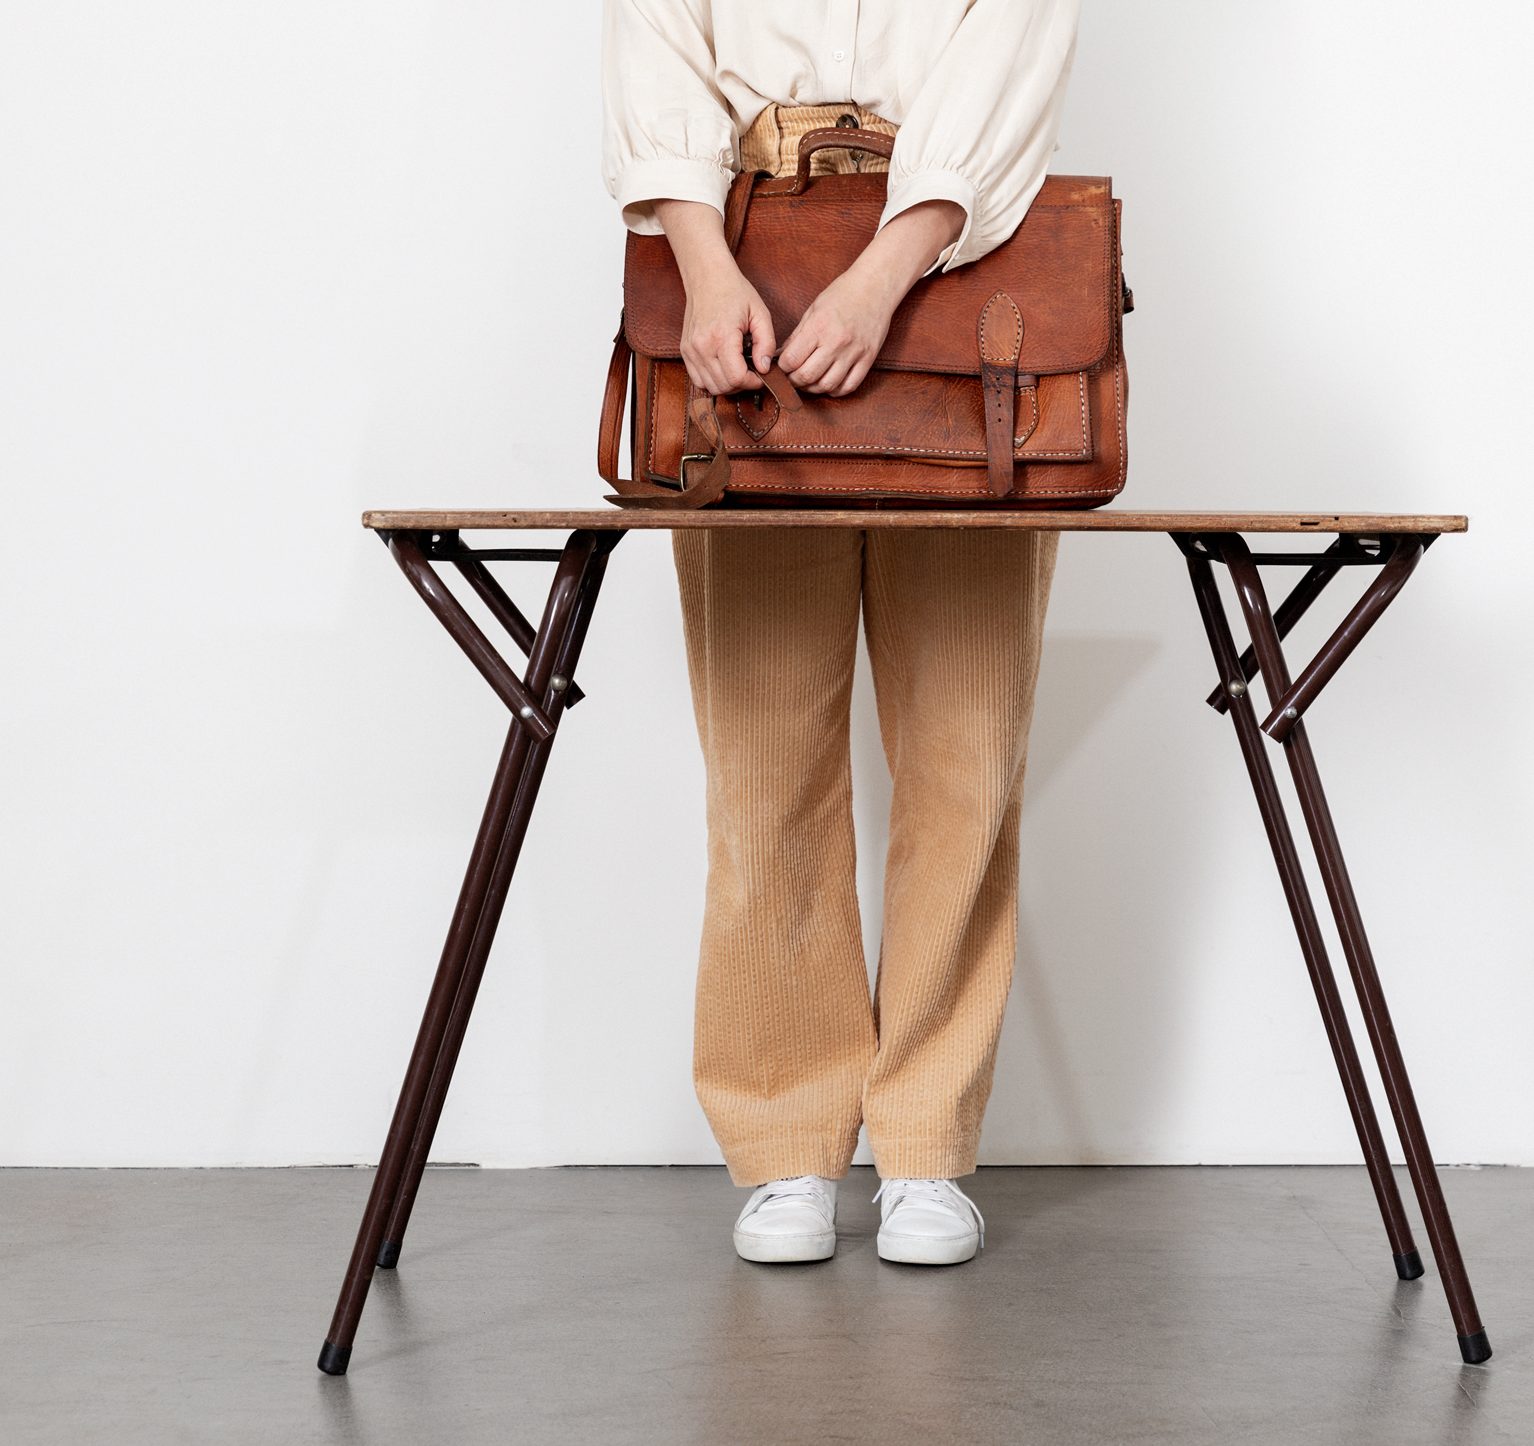 Table with a laptopbag on top of it